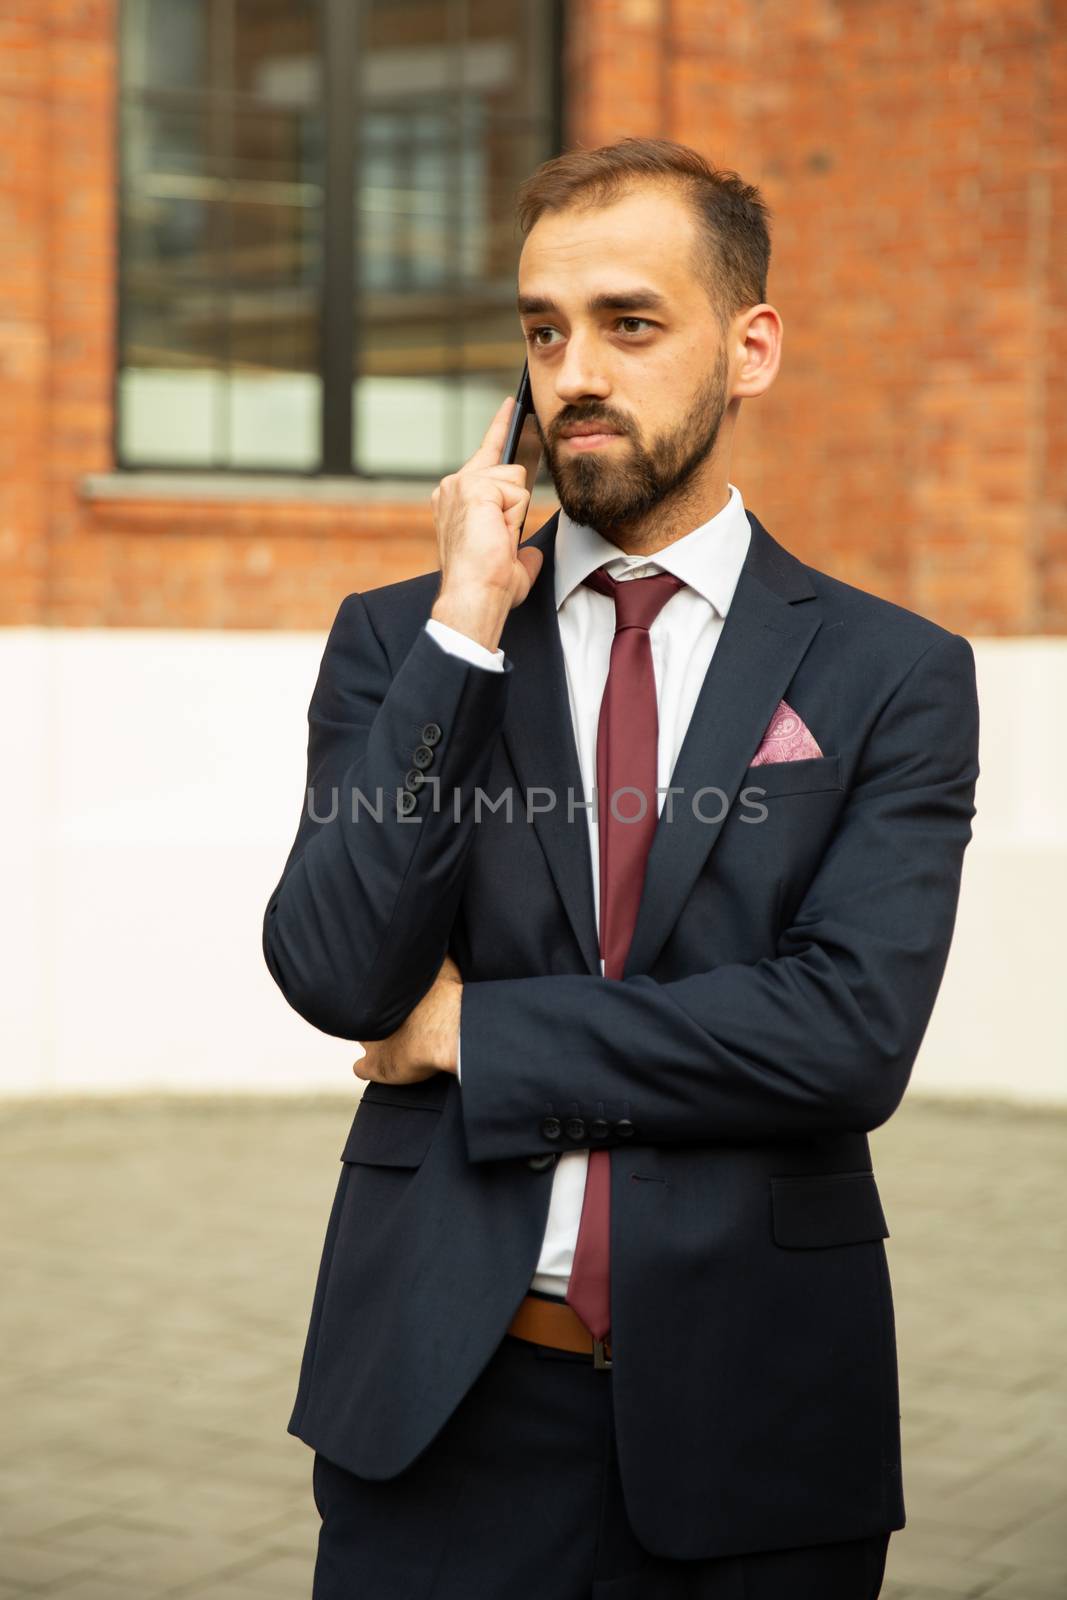 Young man dressed in a suit talking on the phone near a building by DCStudio